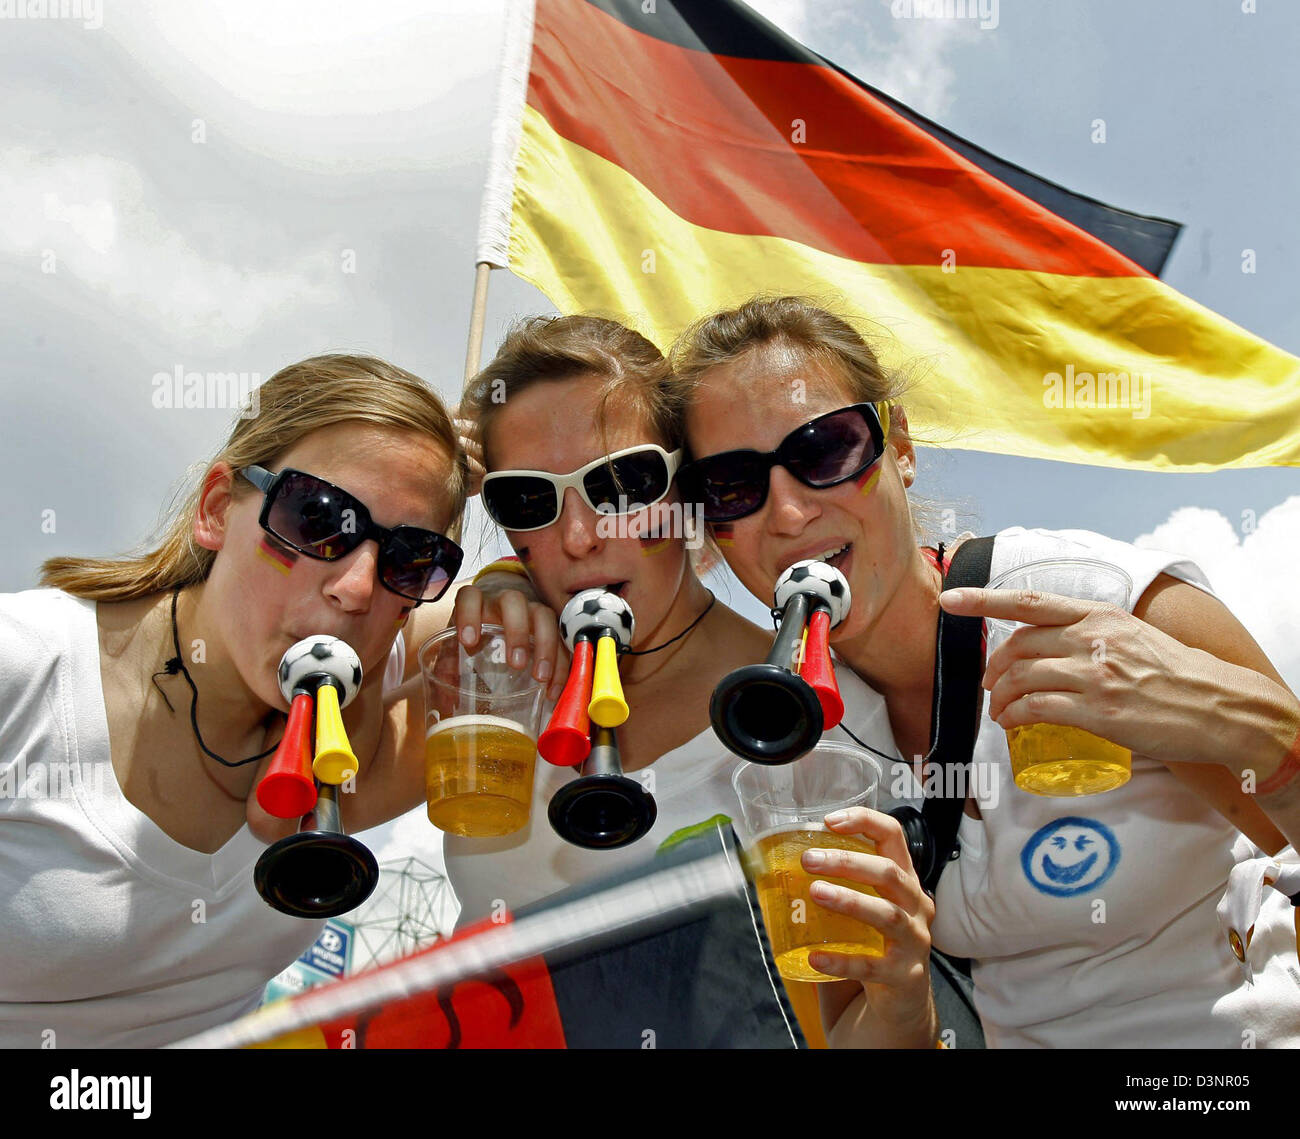 Supporters of the German national soccer team celebrate at the fan zone in downtown Berlin, Germany, Tuesday, 20 June 2006. This took place prior to the group A match of the 2006 FIFA World Cup between Ecuador and Germany in Berlin. Photo: Marcel Mettelsiefen Stock Photo